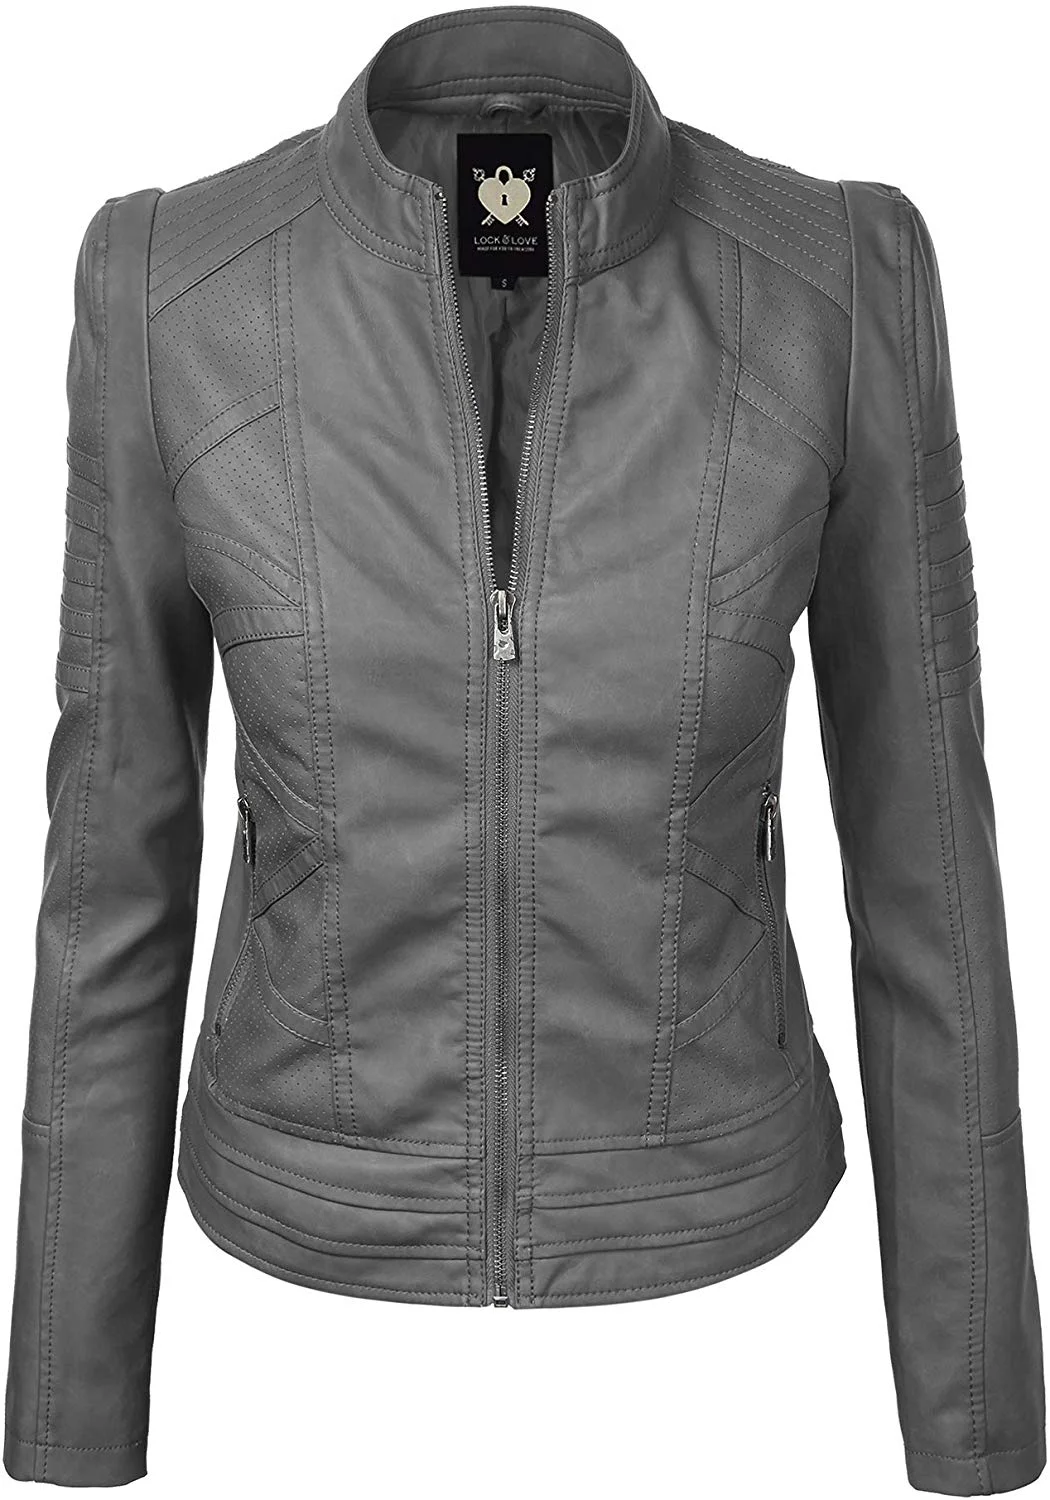 Women's Quilted Faux Leather Moto Biker Jacket